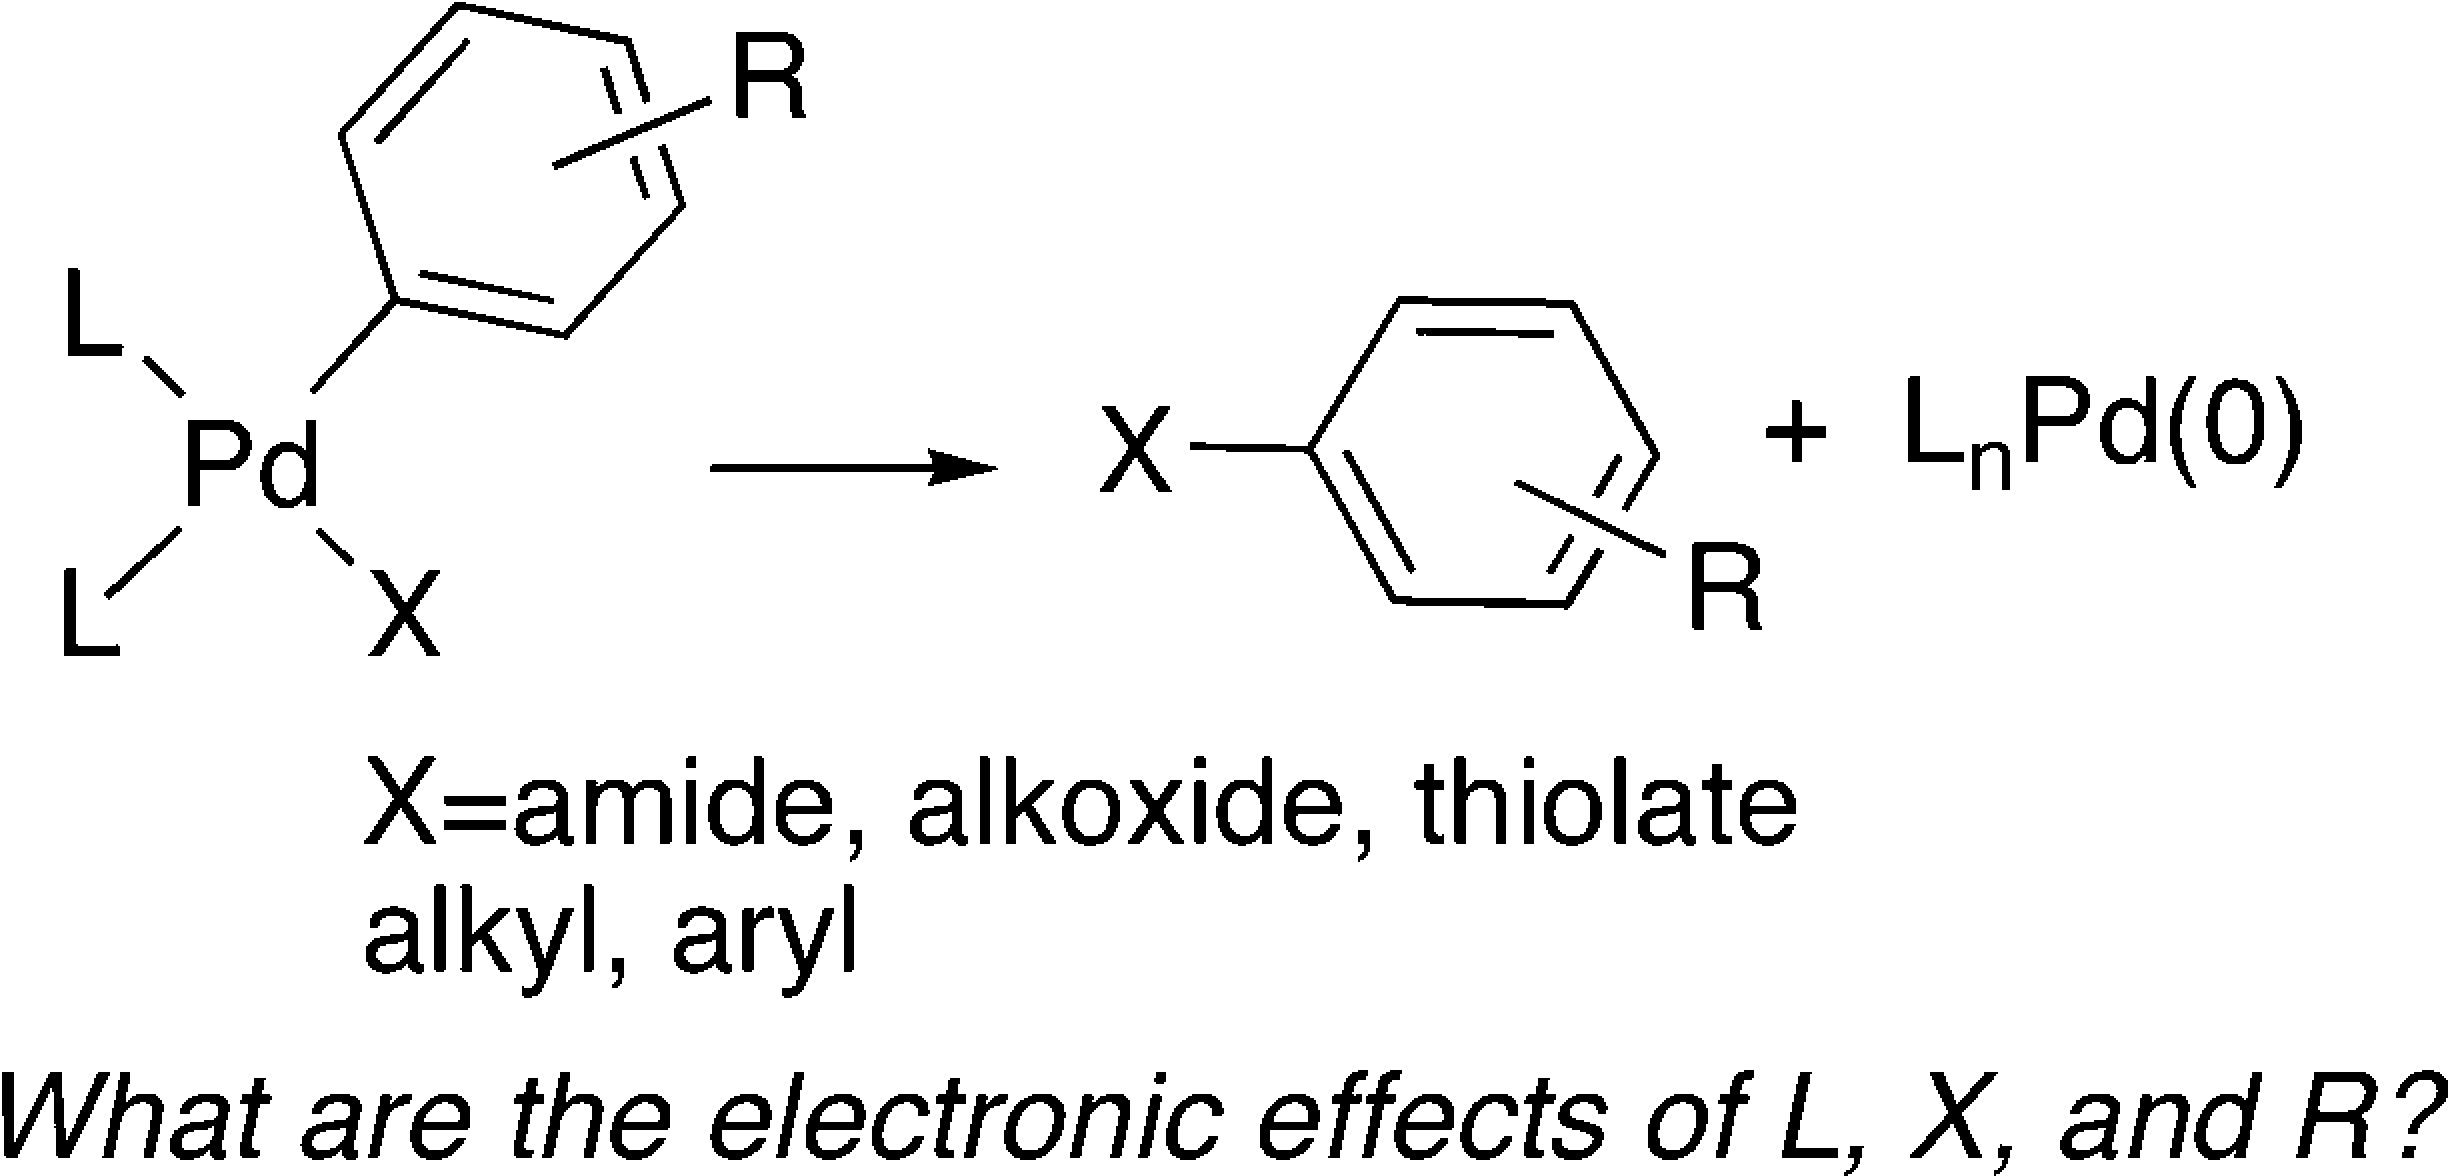 Electronic Effects on Reductive Elimination To Form Carbon-Carbon and Carbon-Heteroatom Bonds from Palladium(II) Complexes